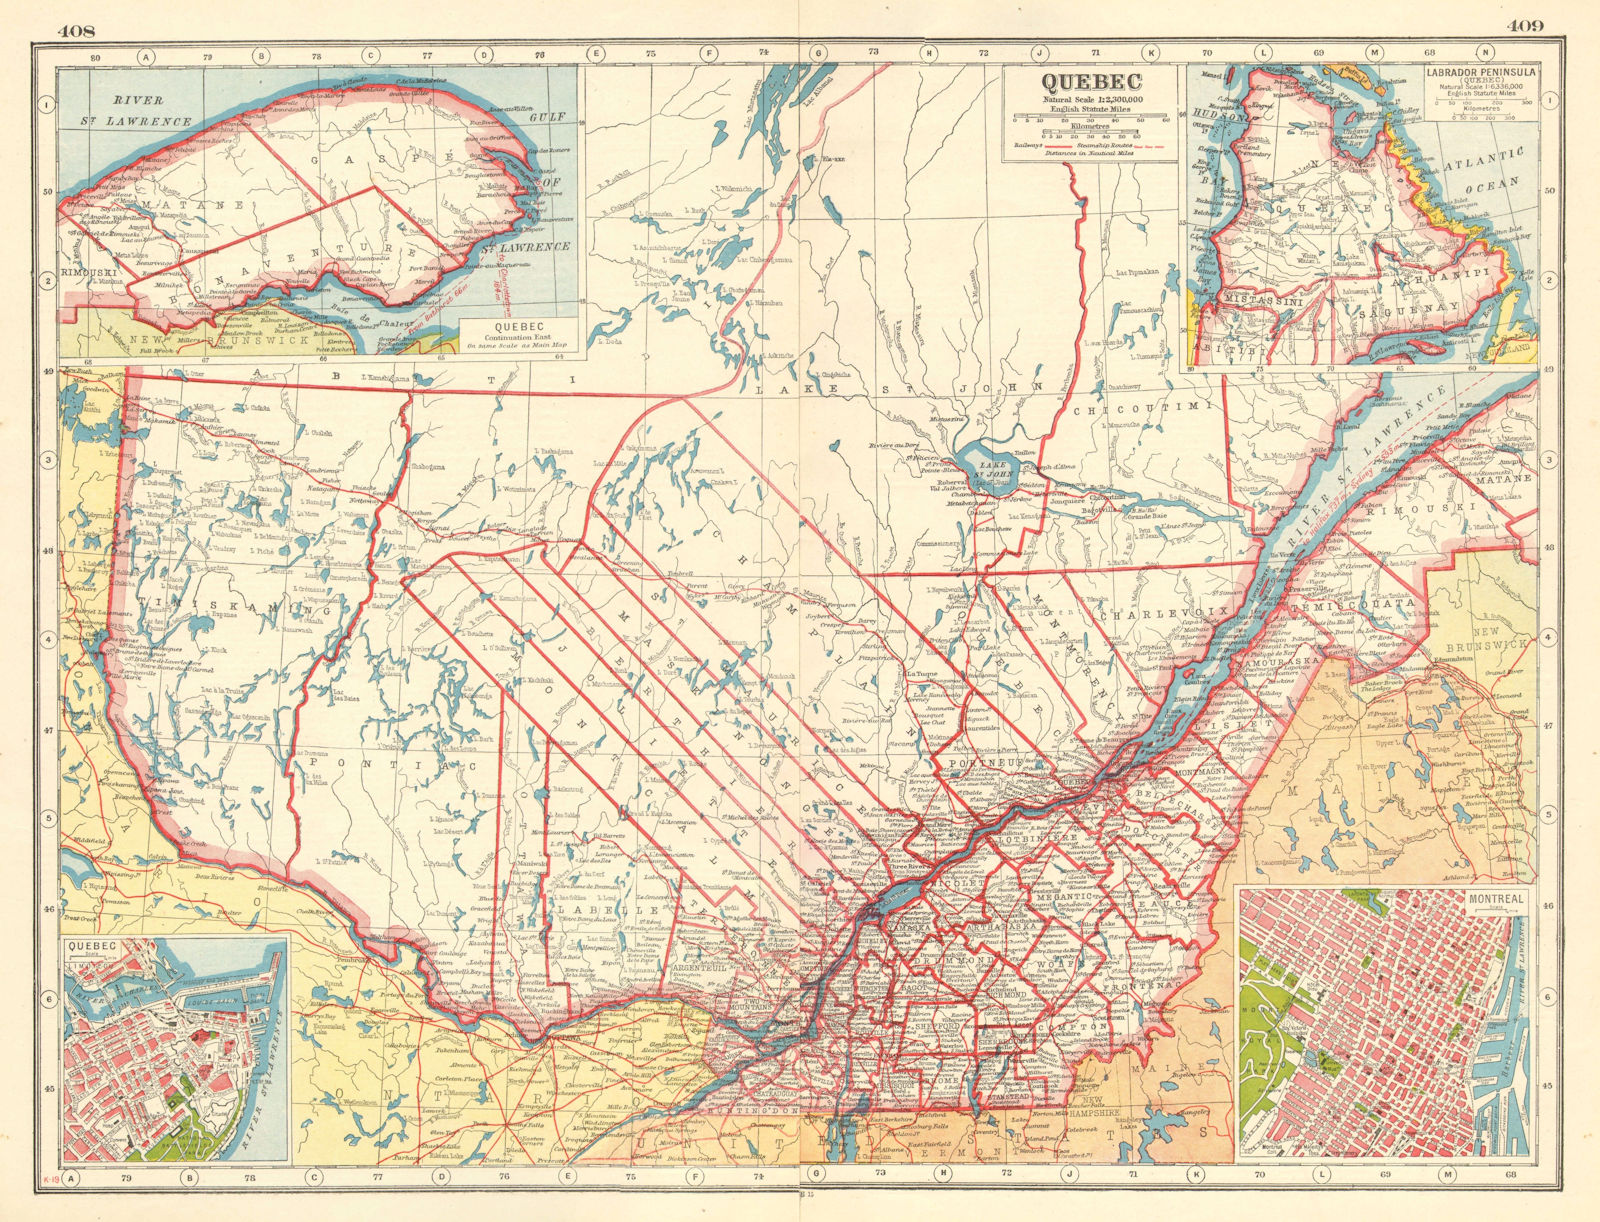 QUEBEC QUÉBEC. Showing counties. Inset plans of Quebec City & Montreal 1920 map